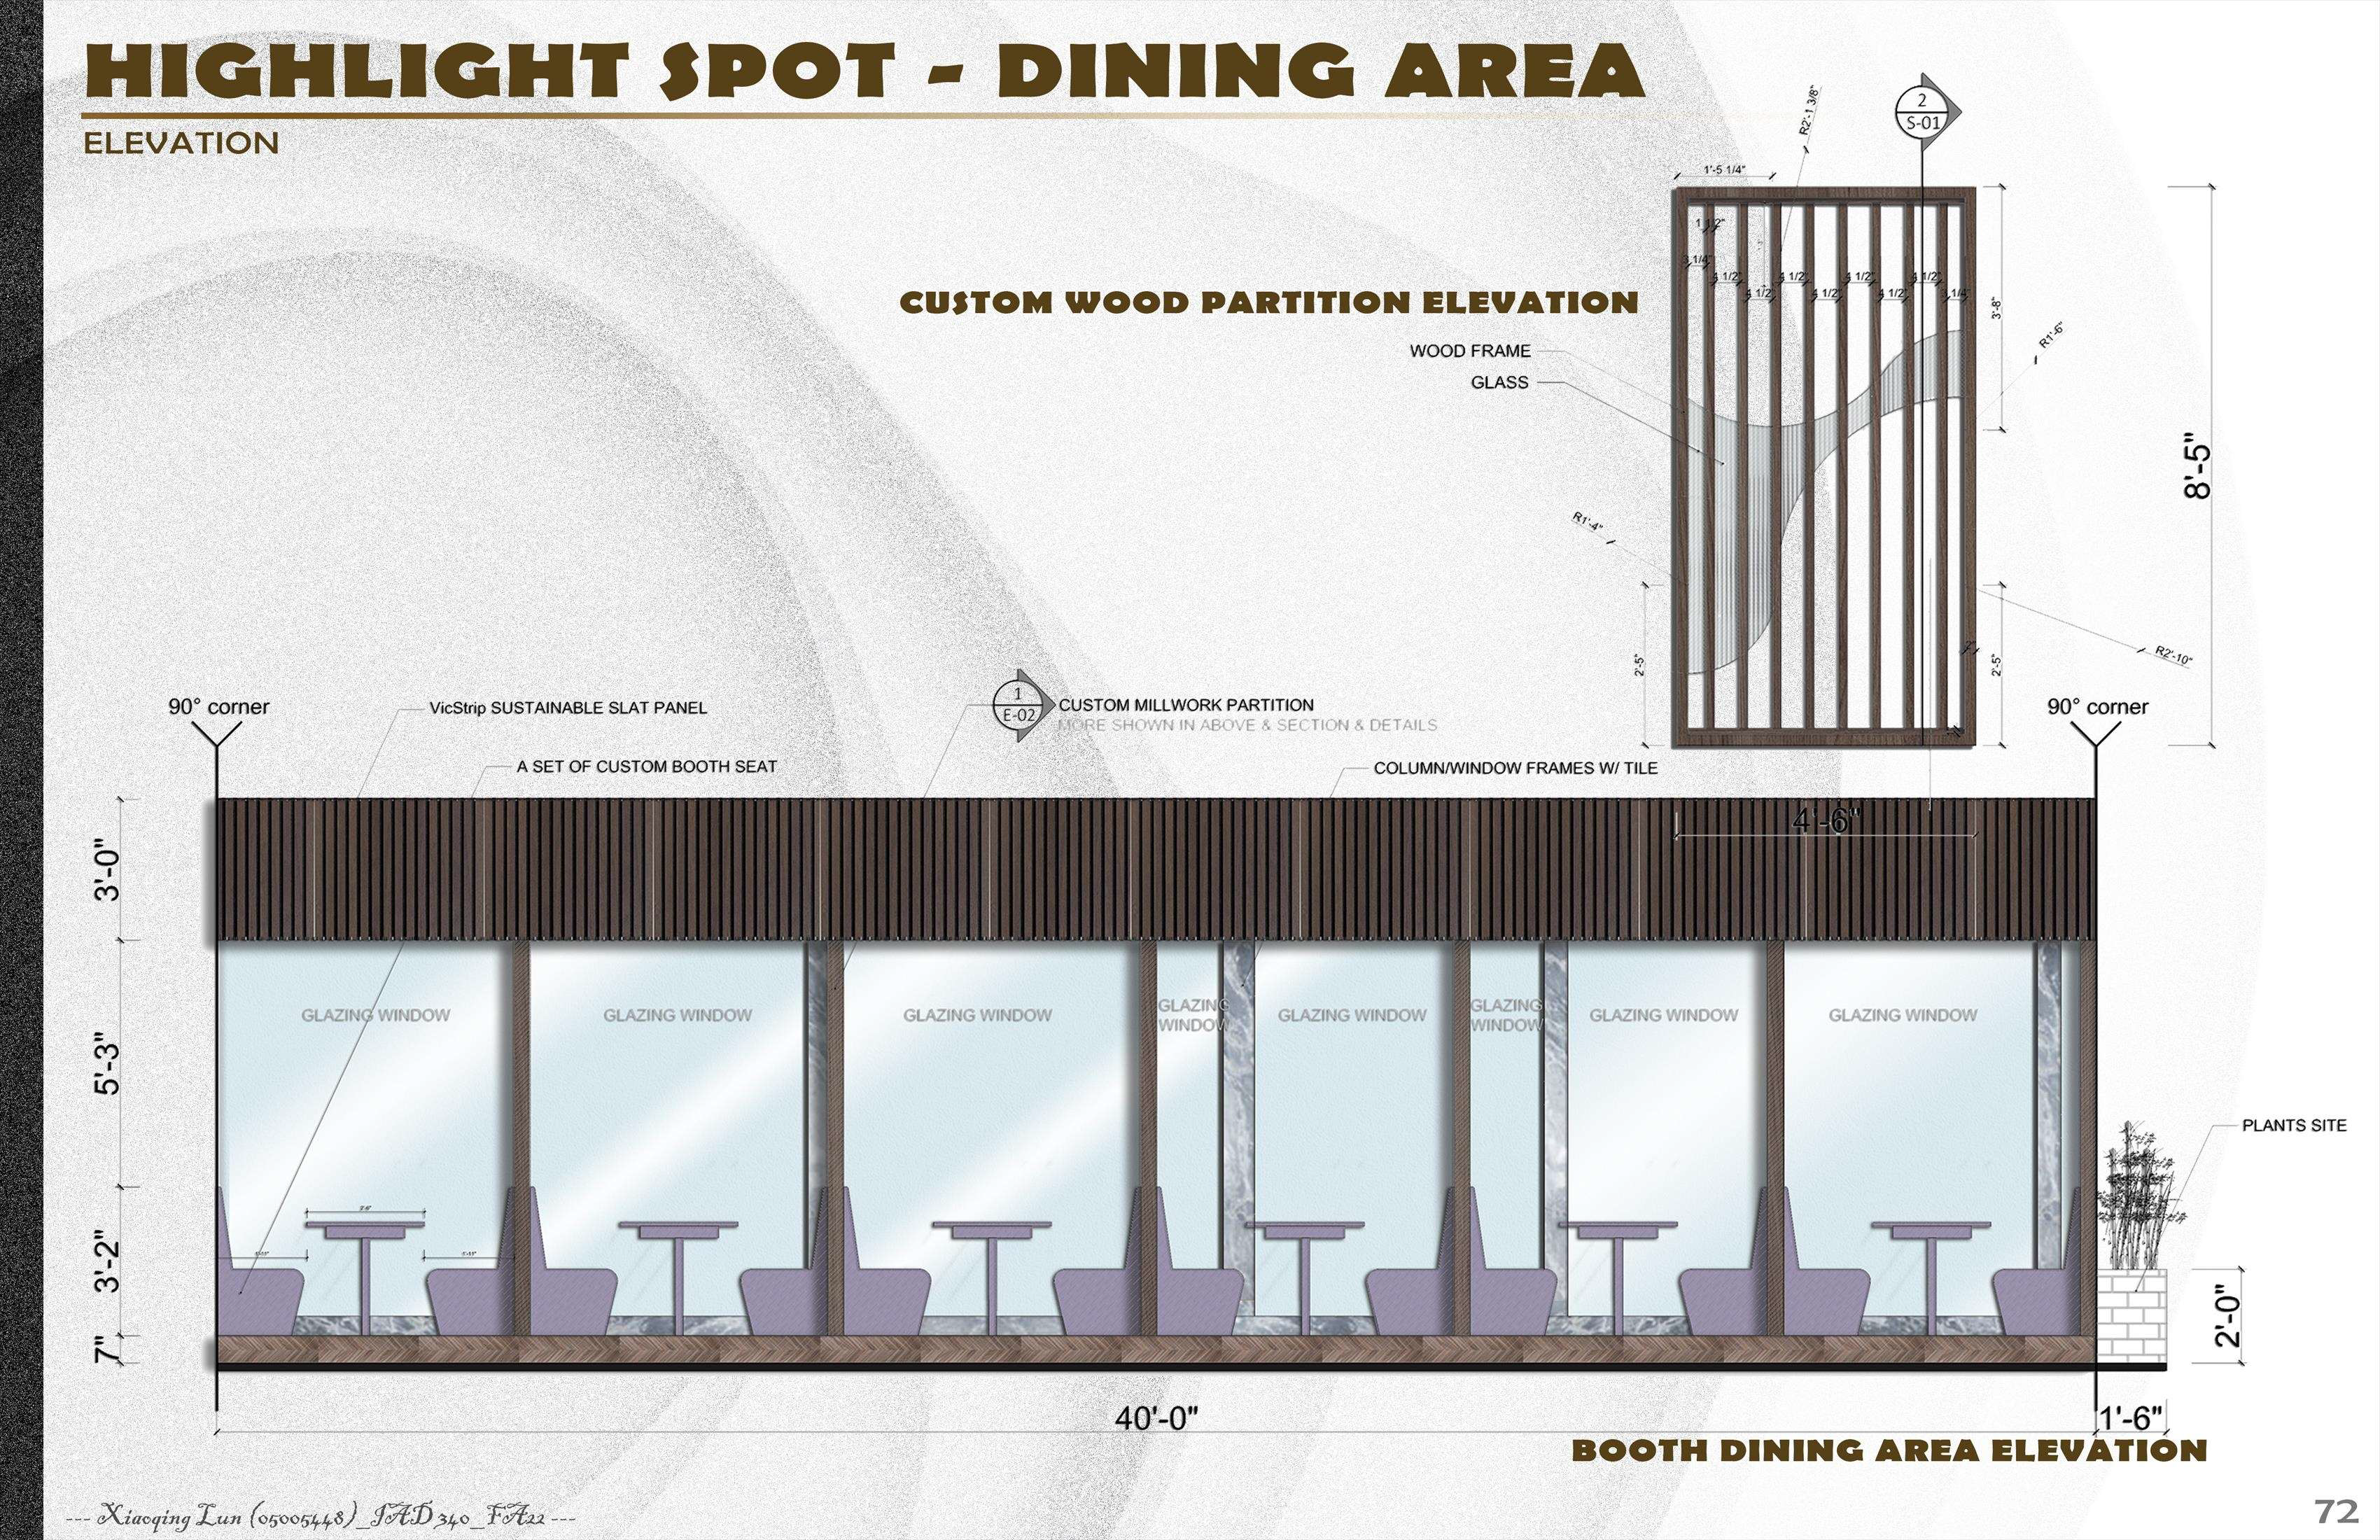 Ultimate Freshness Farm-to-Table Restaurant 05_Floor Plan & Elevation - page 6